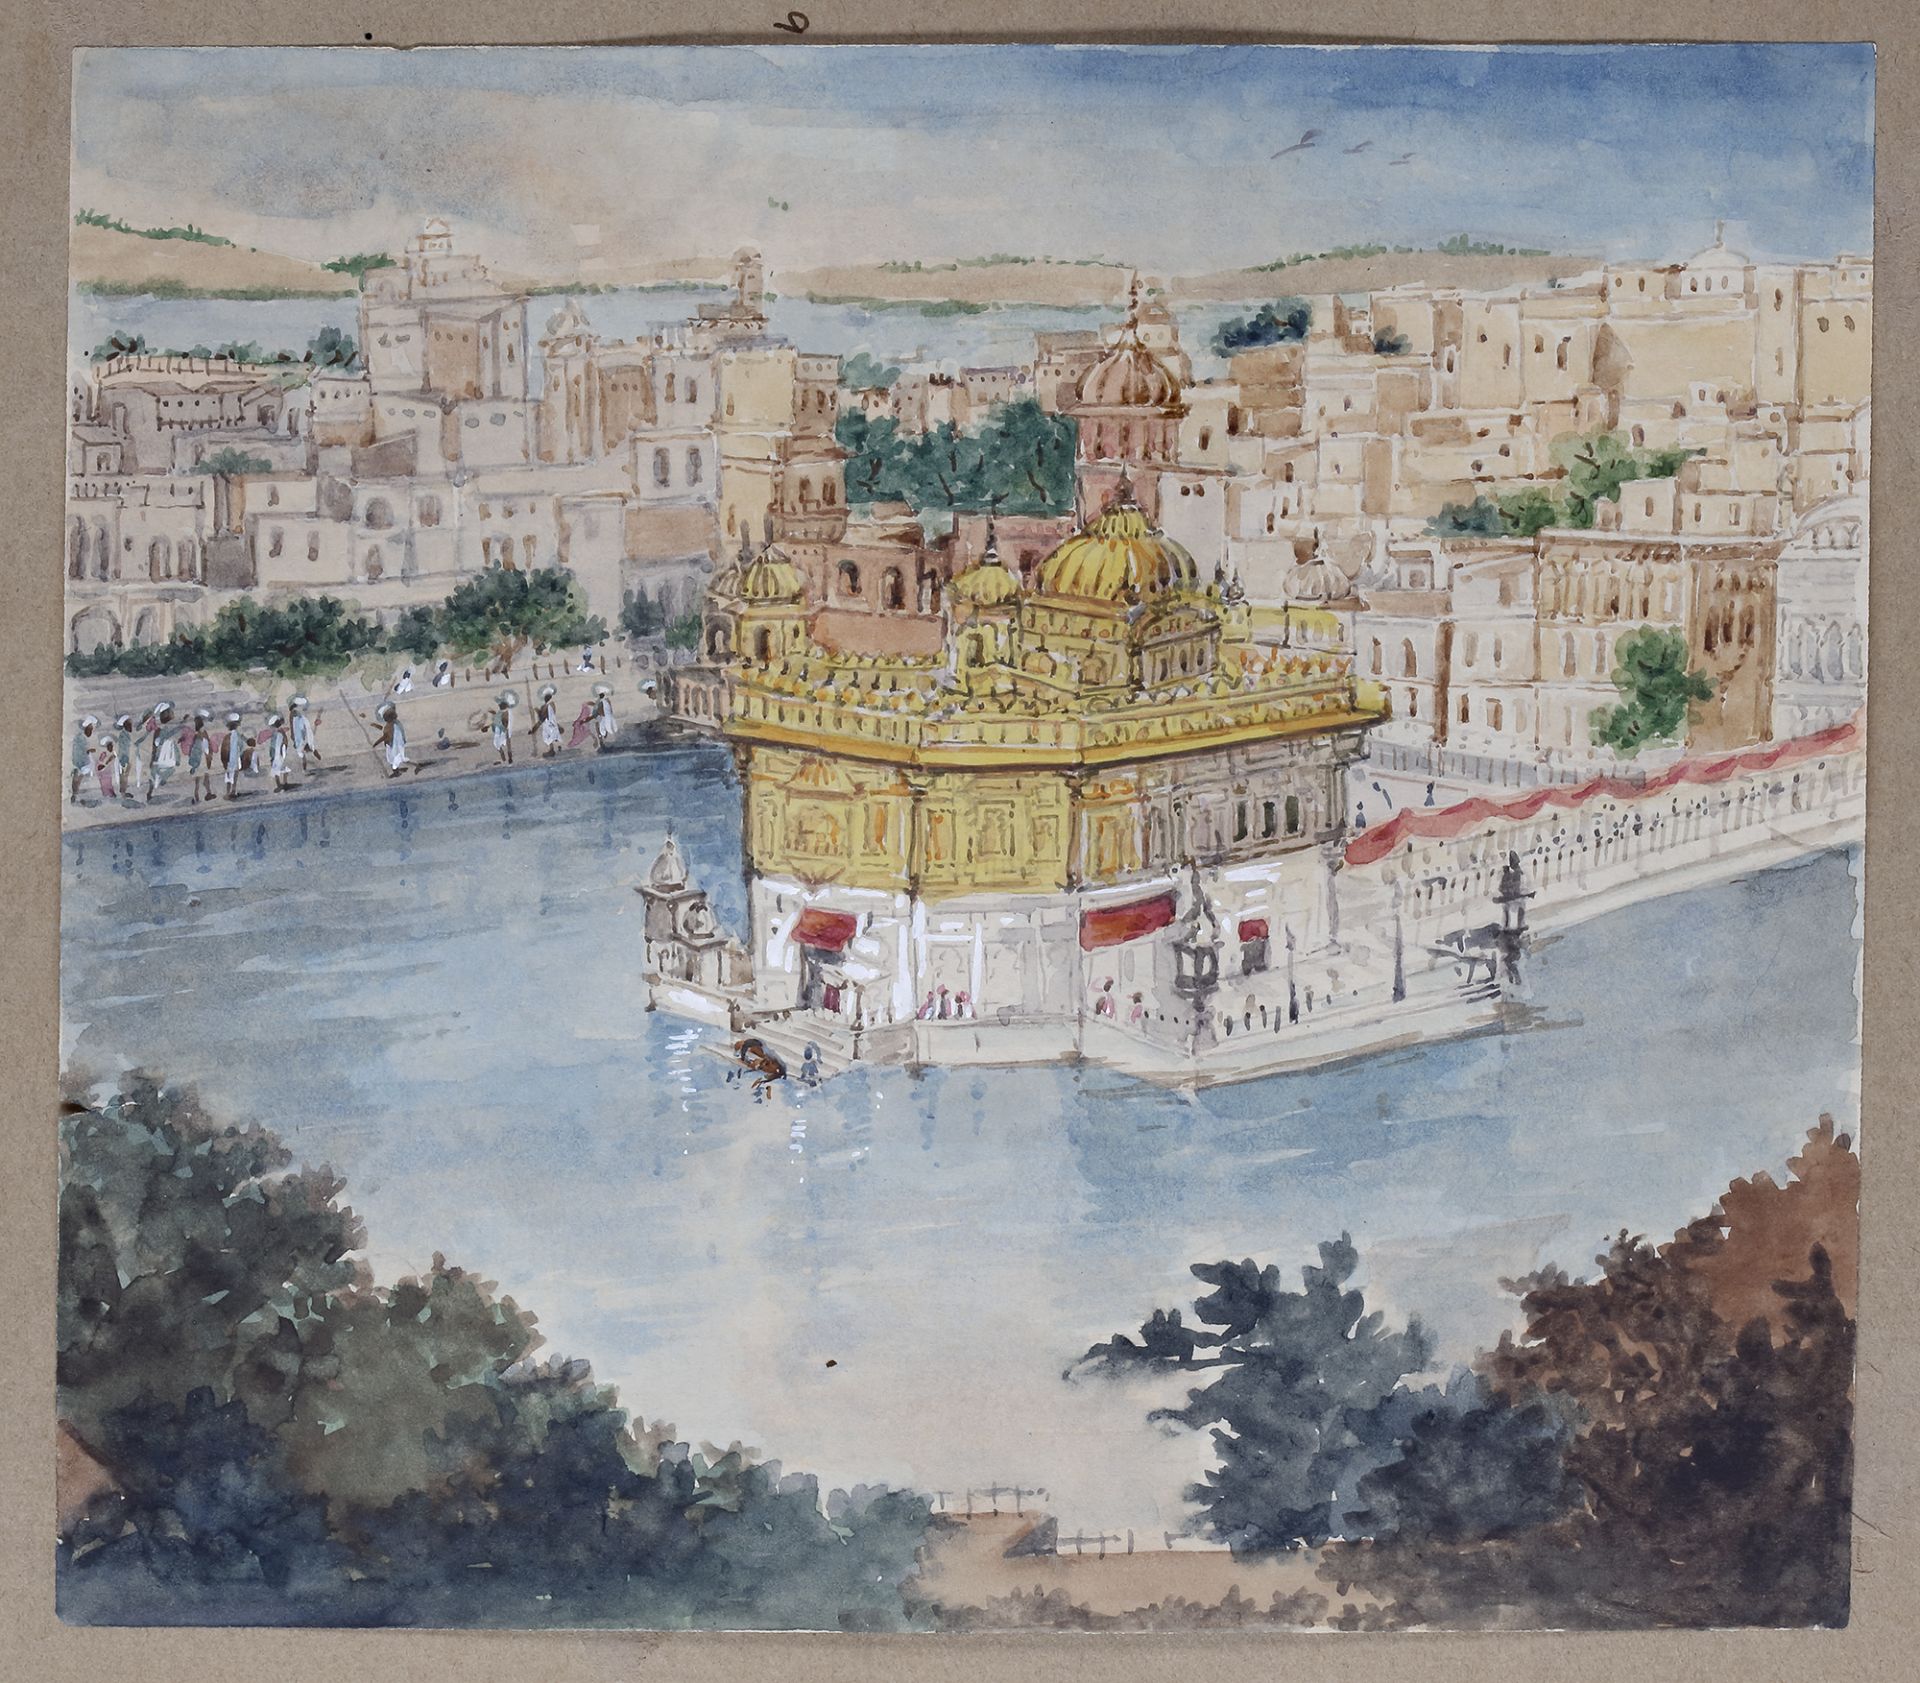 VIEWS OF THE GOLDEN TEMPLE AT AMRITSAR EUROPEAN SCHOOL, 19TH CENTURY - Image 6 of 10